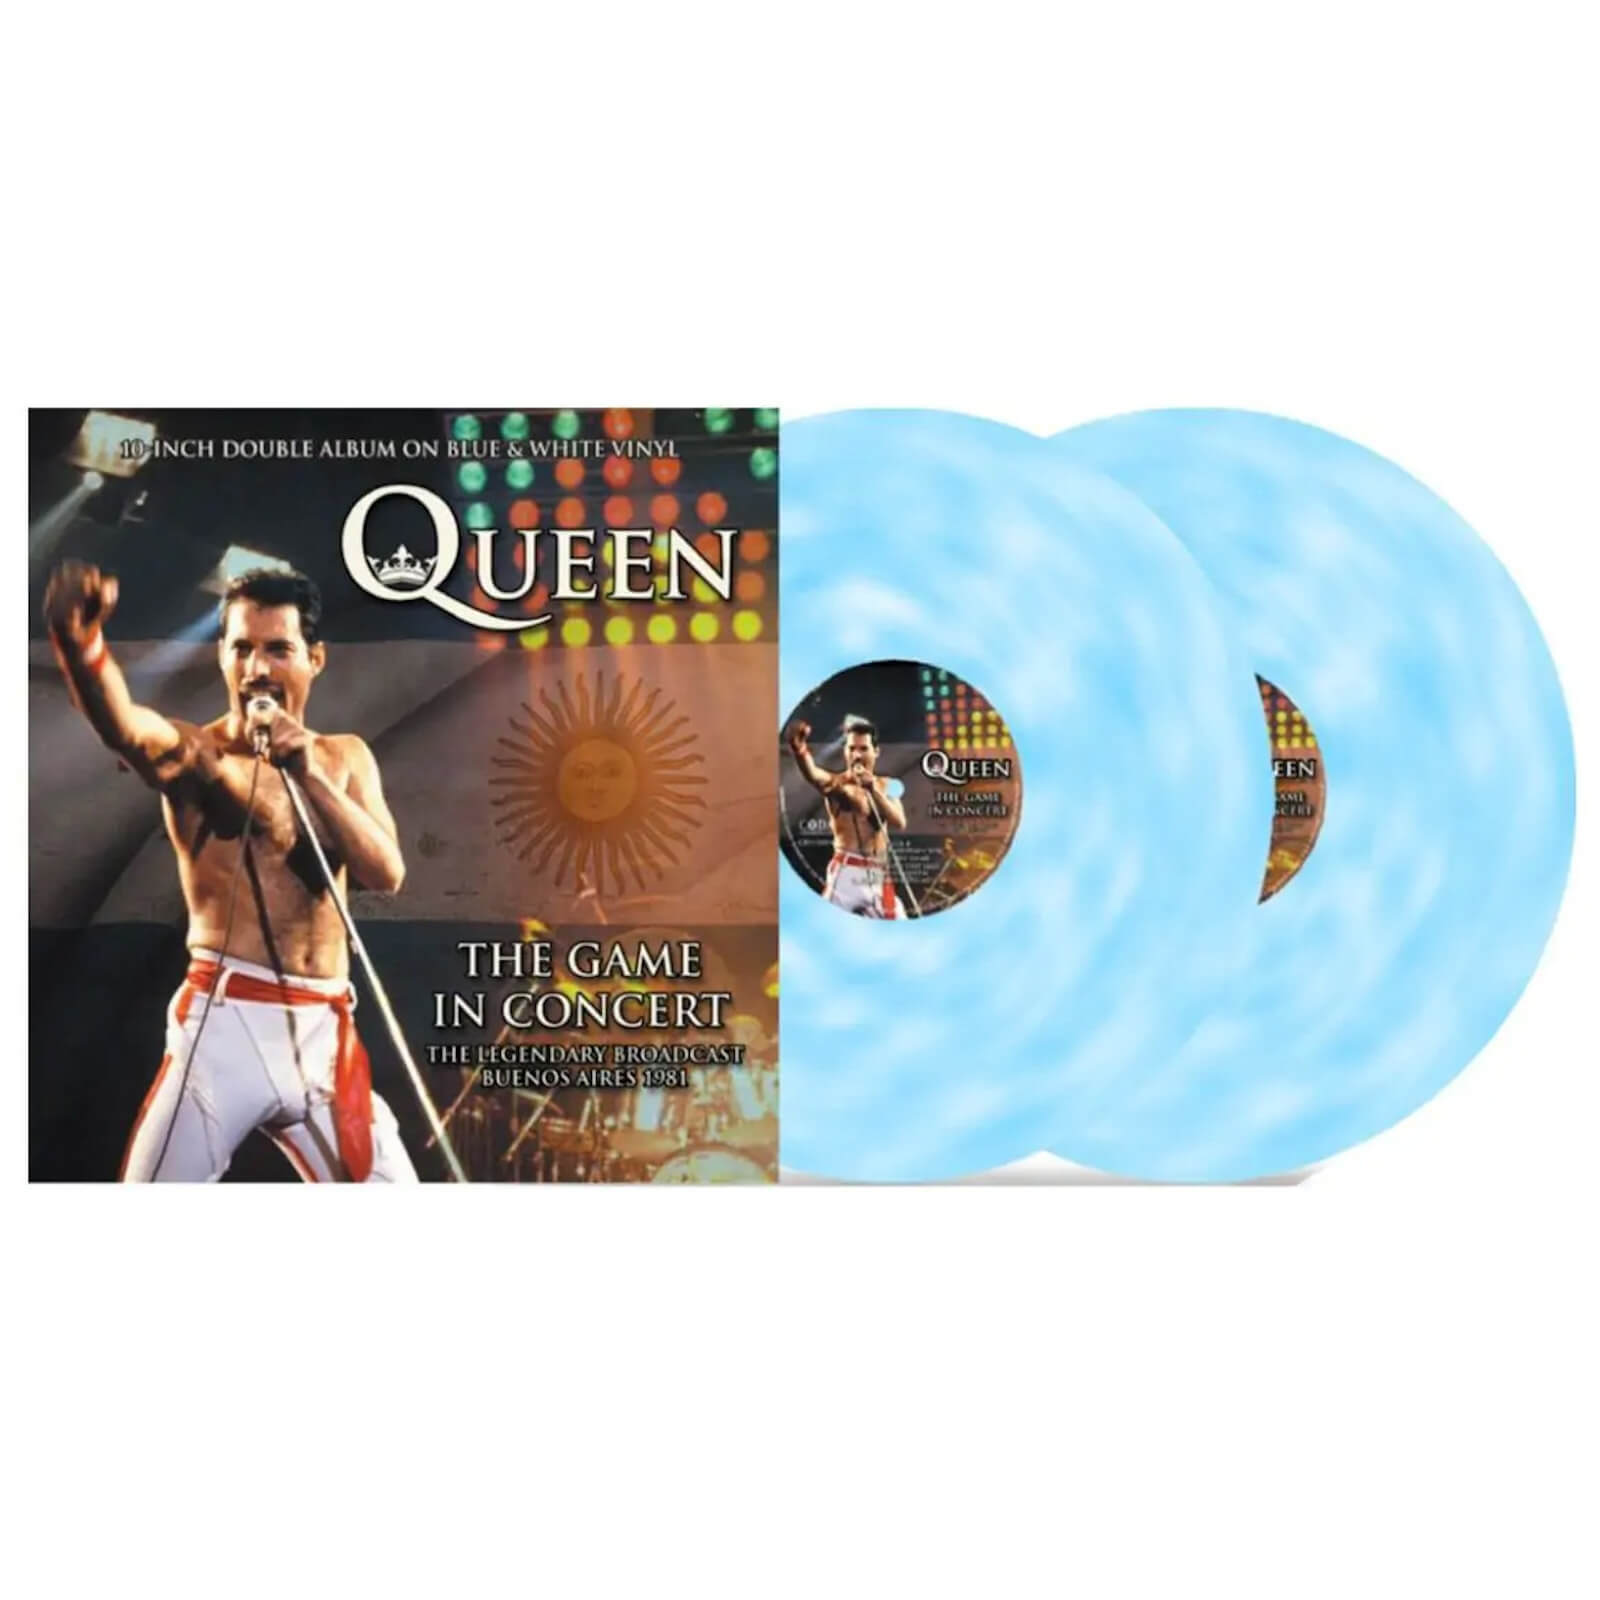 Queen - The Game In Concert (Blue & White Vinyl) 2x10